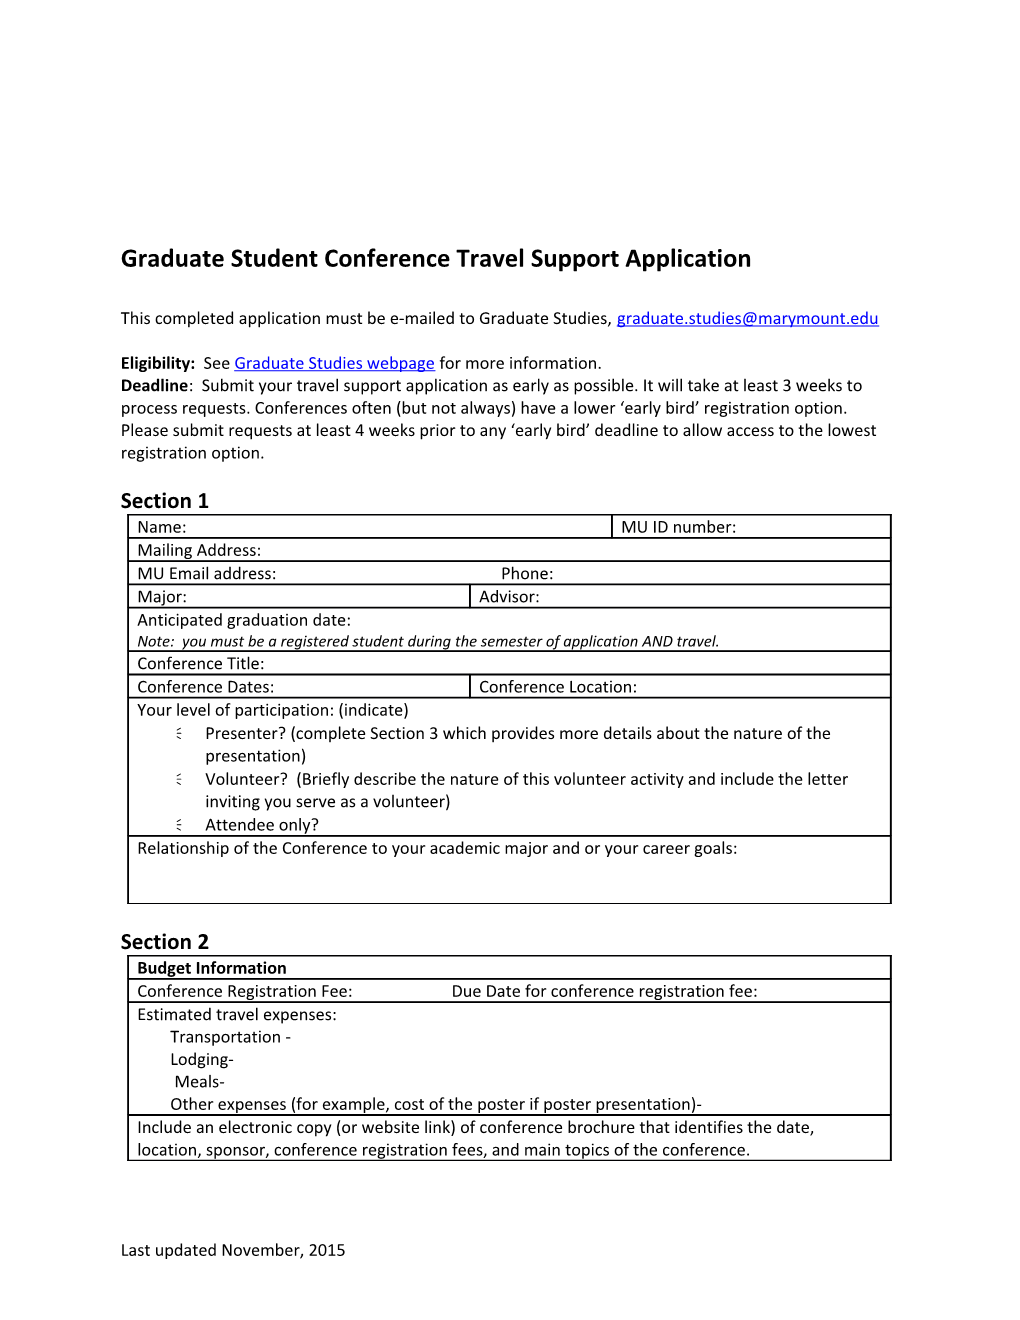 Graduate Student Conference Travel Support Application